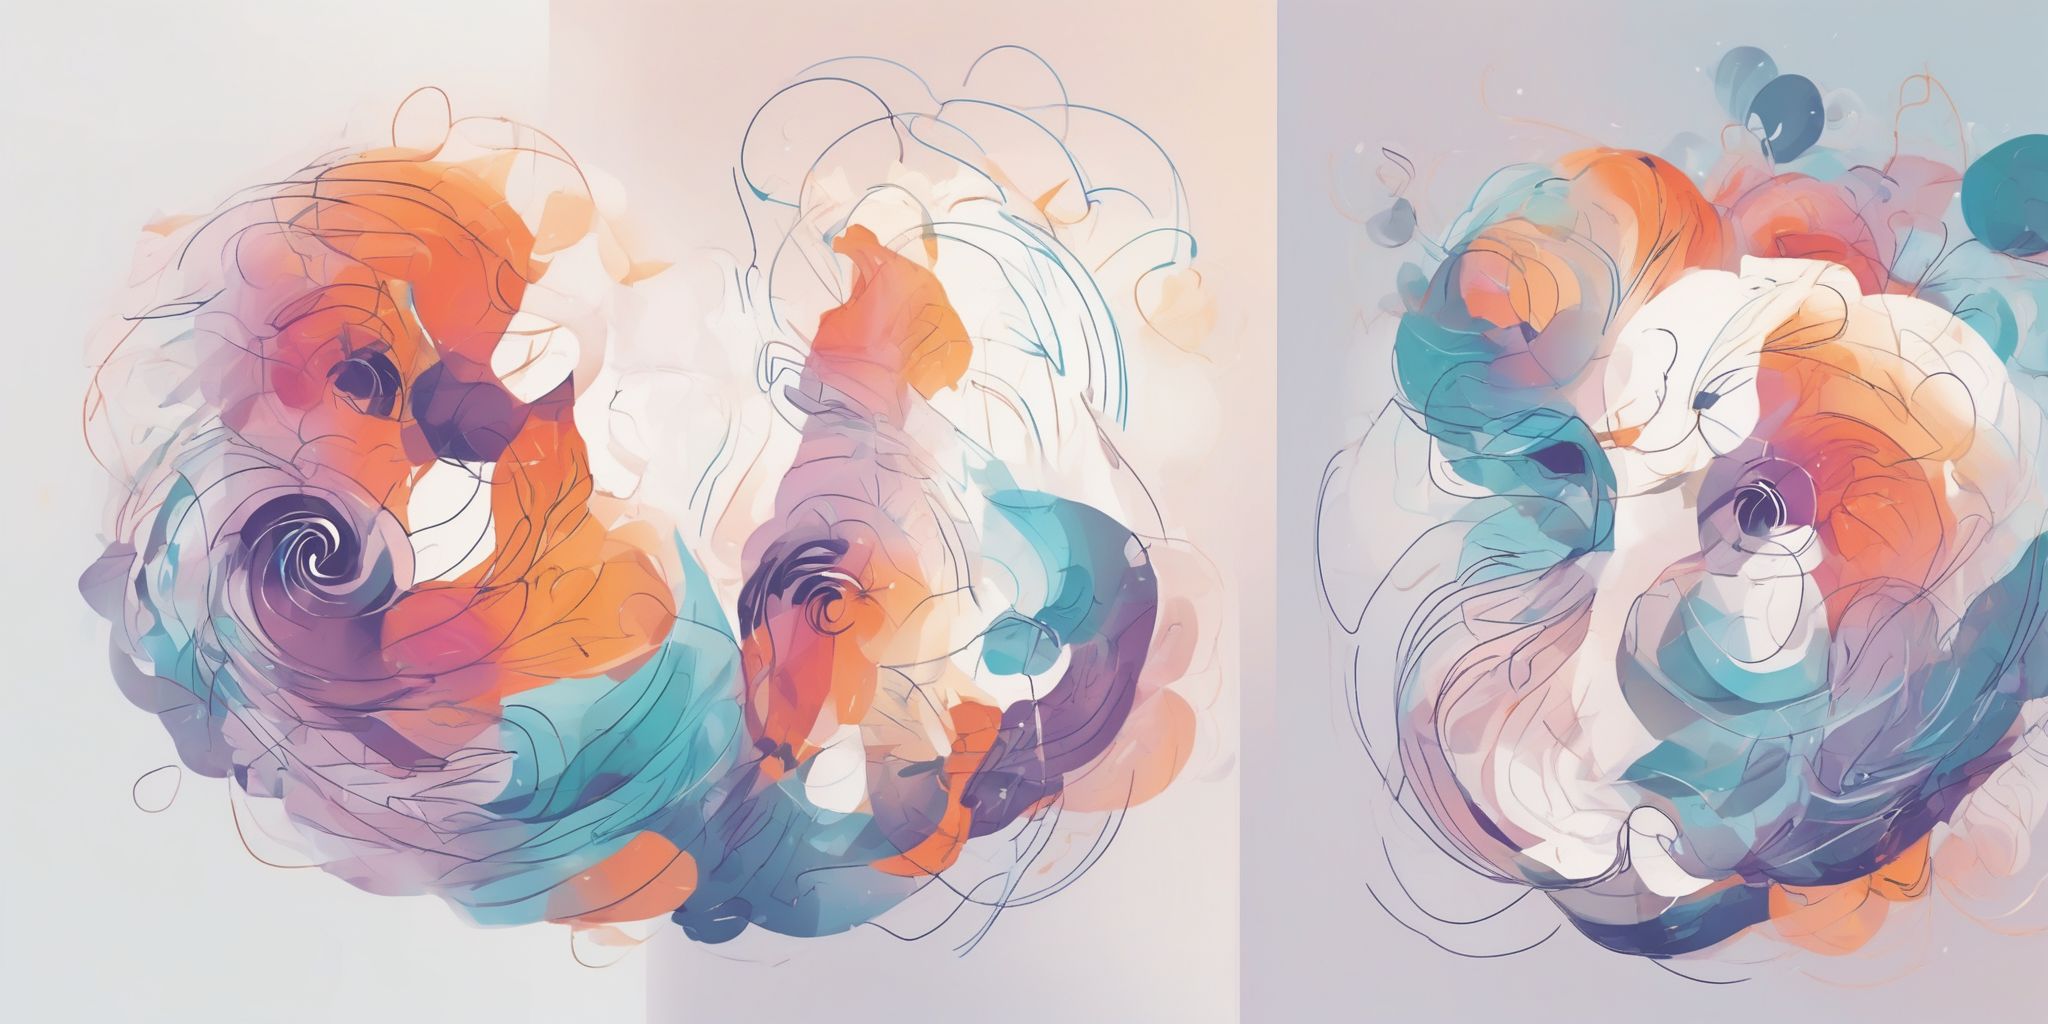 insight in illustration style with gradients and white background